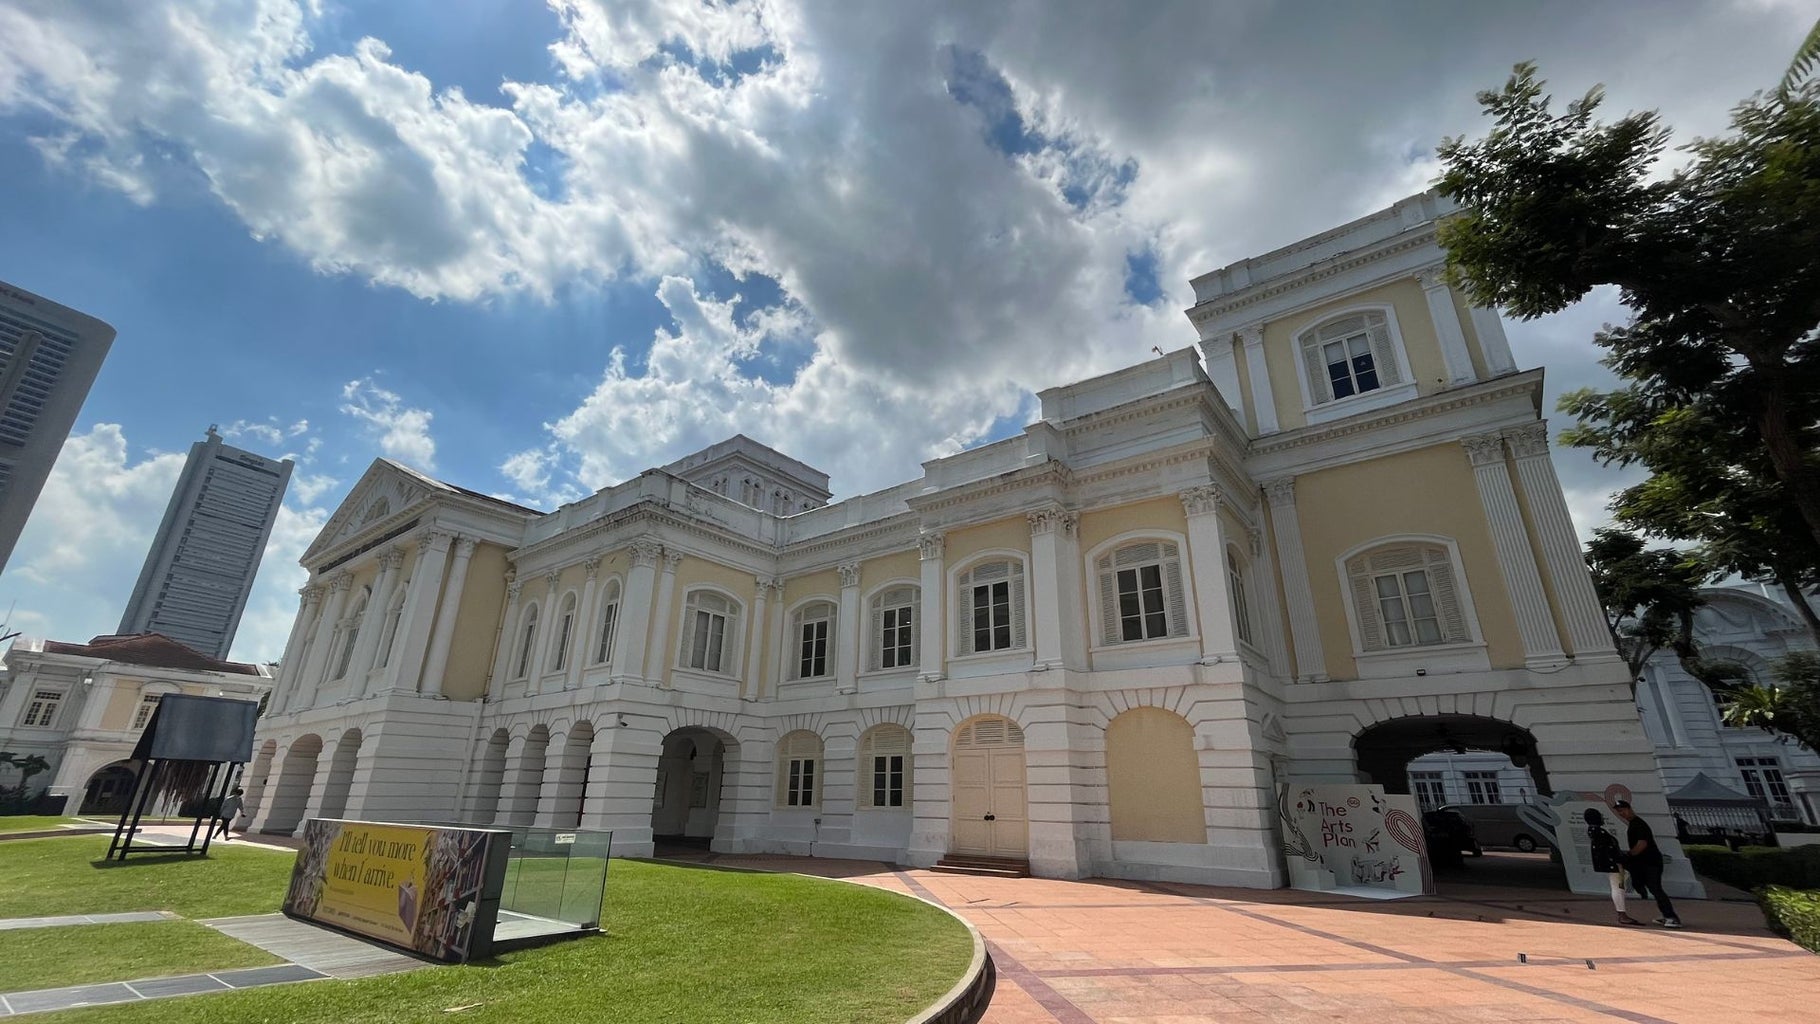 A picture of The Arts House building in Singapore